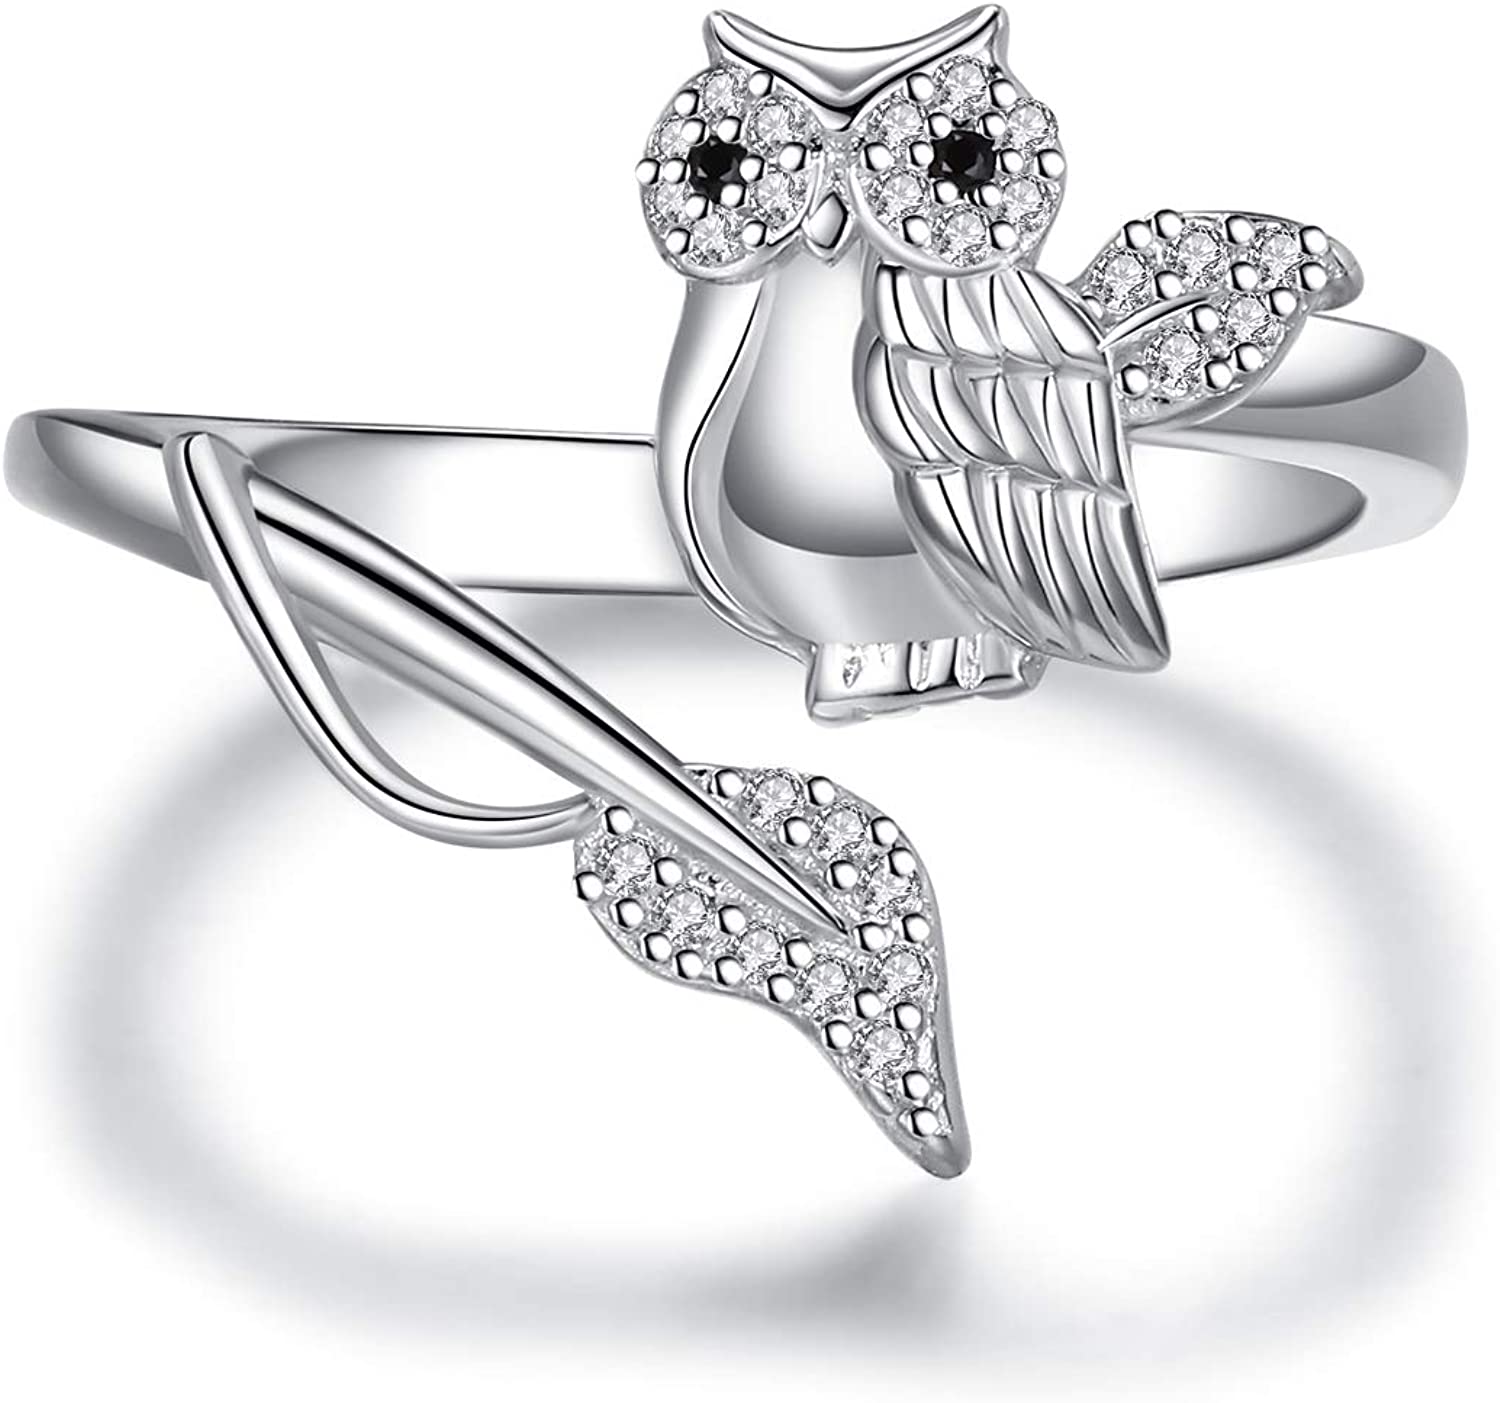 Sterling Silver Rings Cubic Zirconia Vintage Rose/ Owl /Feather/V Shape/Fox/Adjustable Wrap Open Ring for Women Girls Jewelry